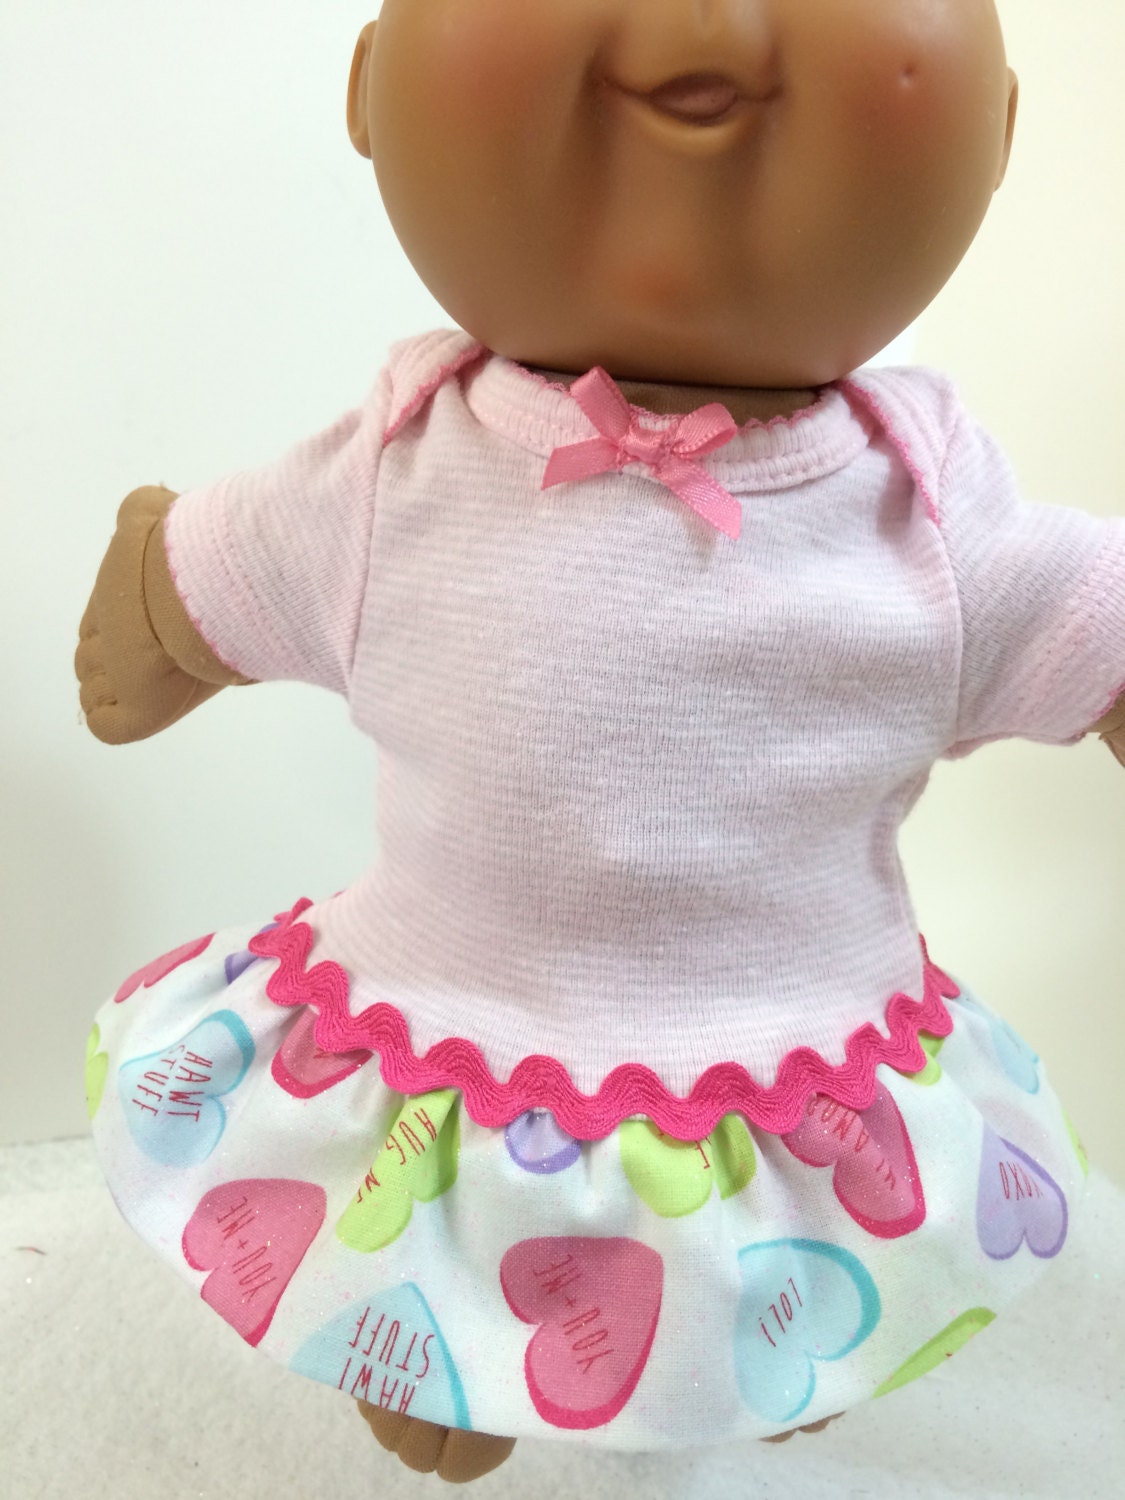 cabbage-patch-11-preemie-doll-clothes-sparkling